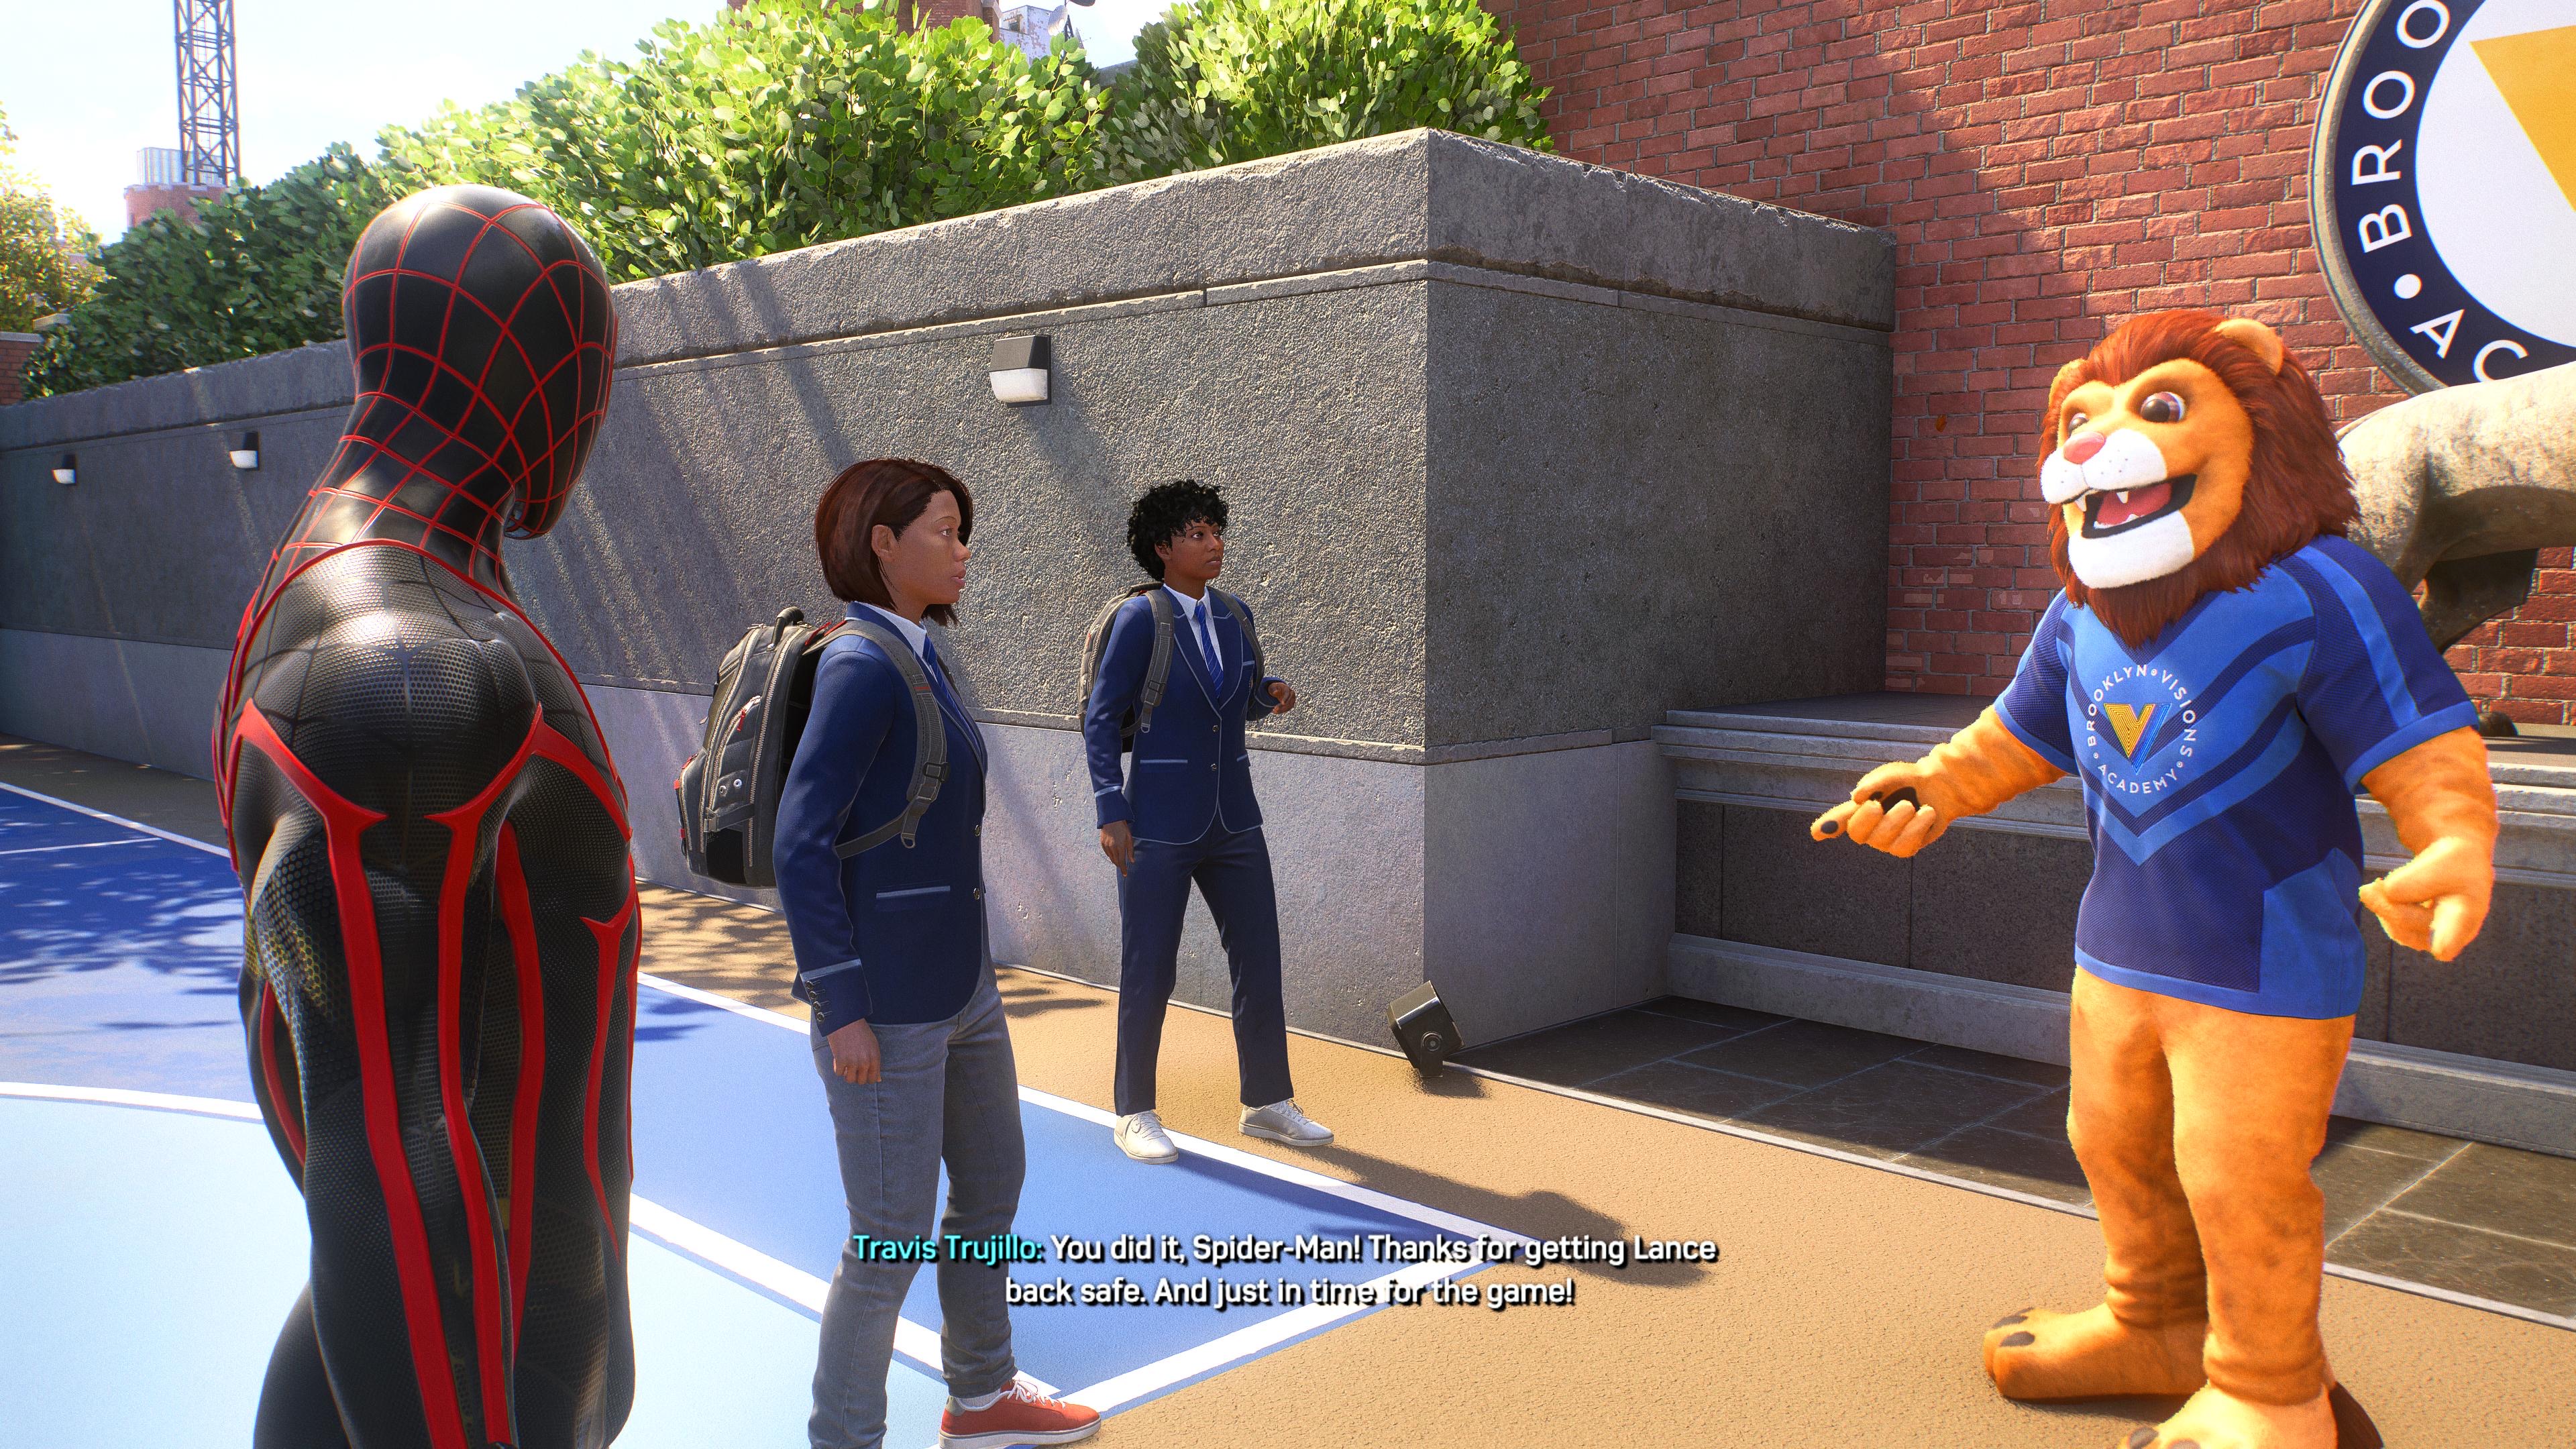 An in game screenshot of Lance the lion mascot from the Senior Prank mission from Marvel's Spider-Man 2.